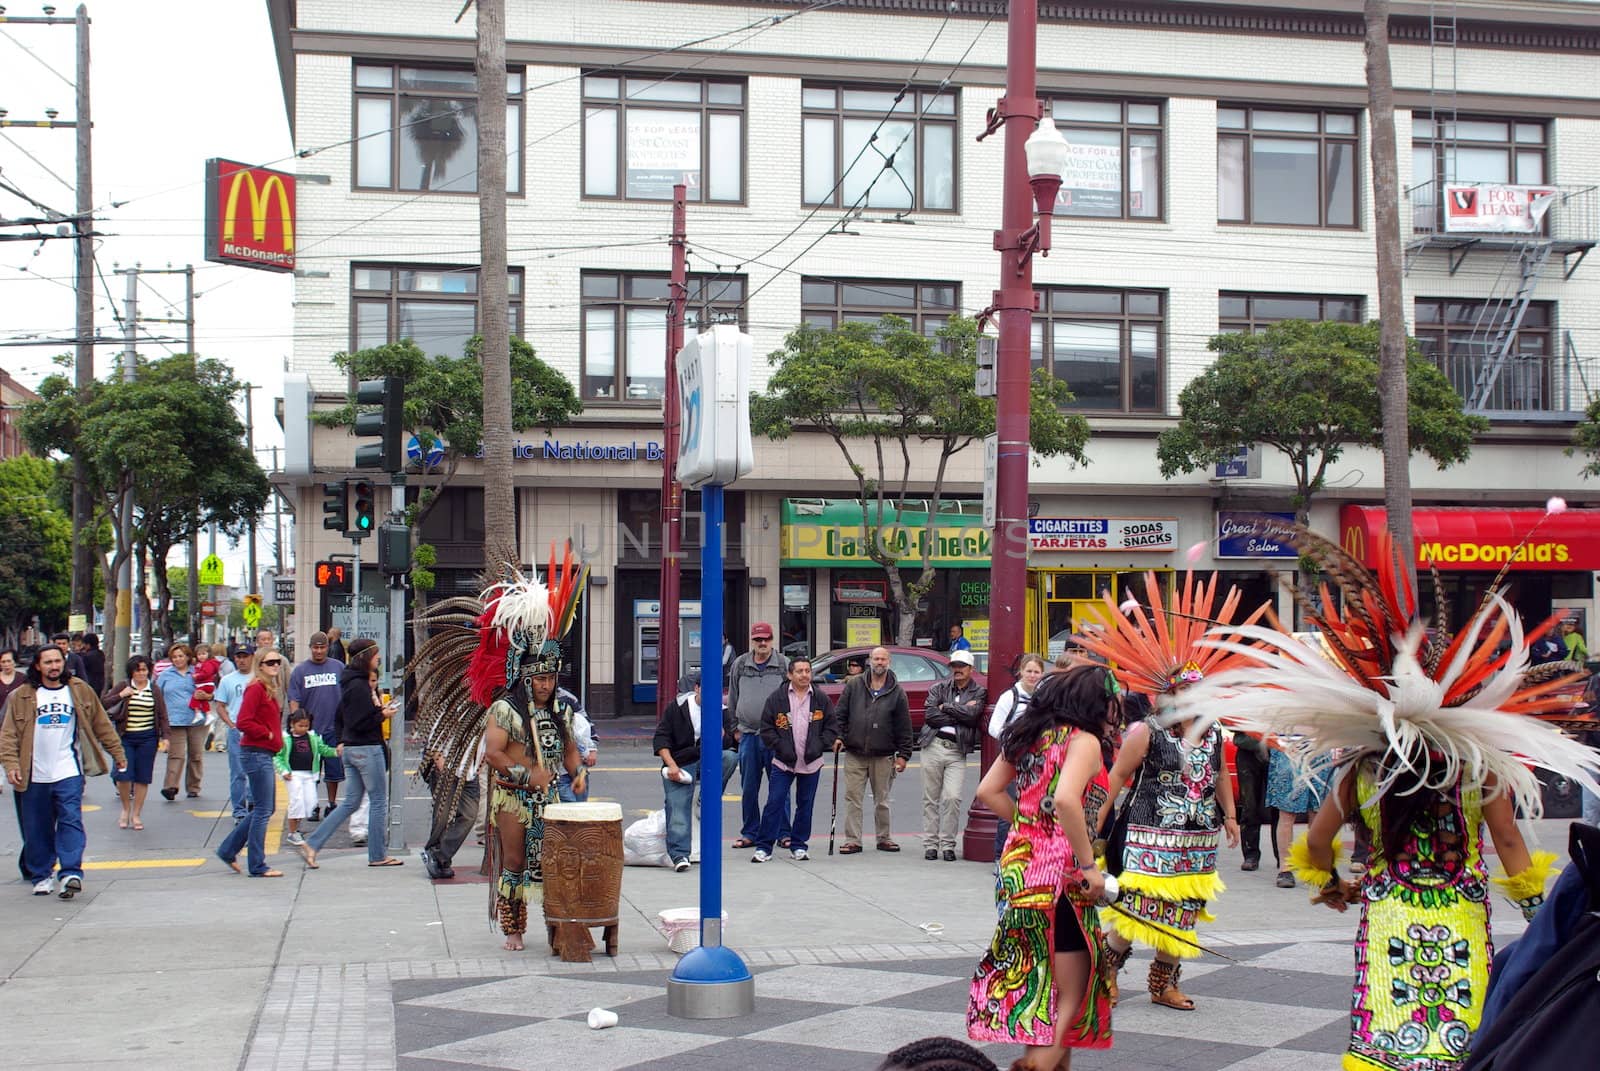 An Aztec street performers in full ceremonial dress plays a drum for women dancers on a street corner in San Francisco California.